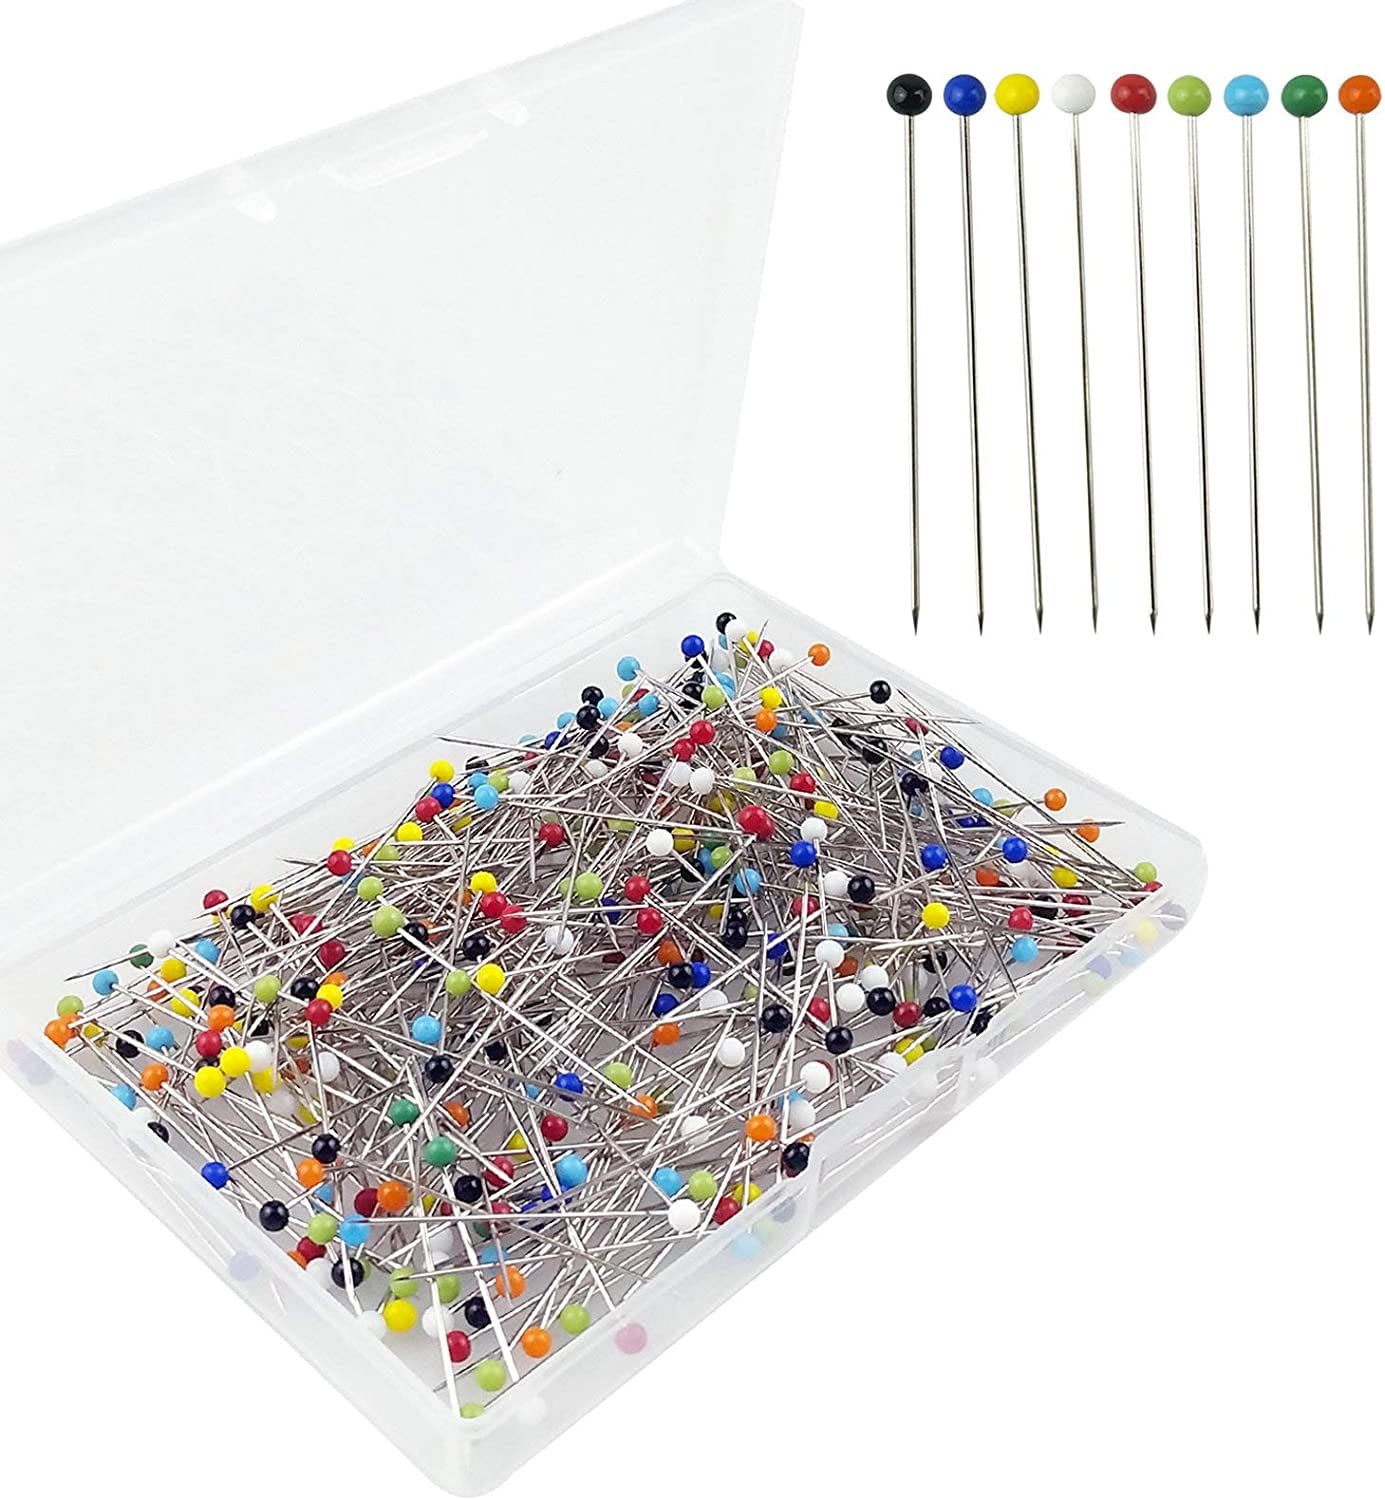 AIEX 1000 Pieces Sewing Pins Glass Ball Multicolor Head Pins Straight Quilting Pins with Pearl Heads for Dressmaker Jewelry Decoration(38mm)